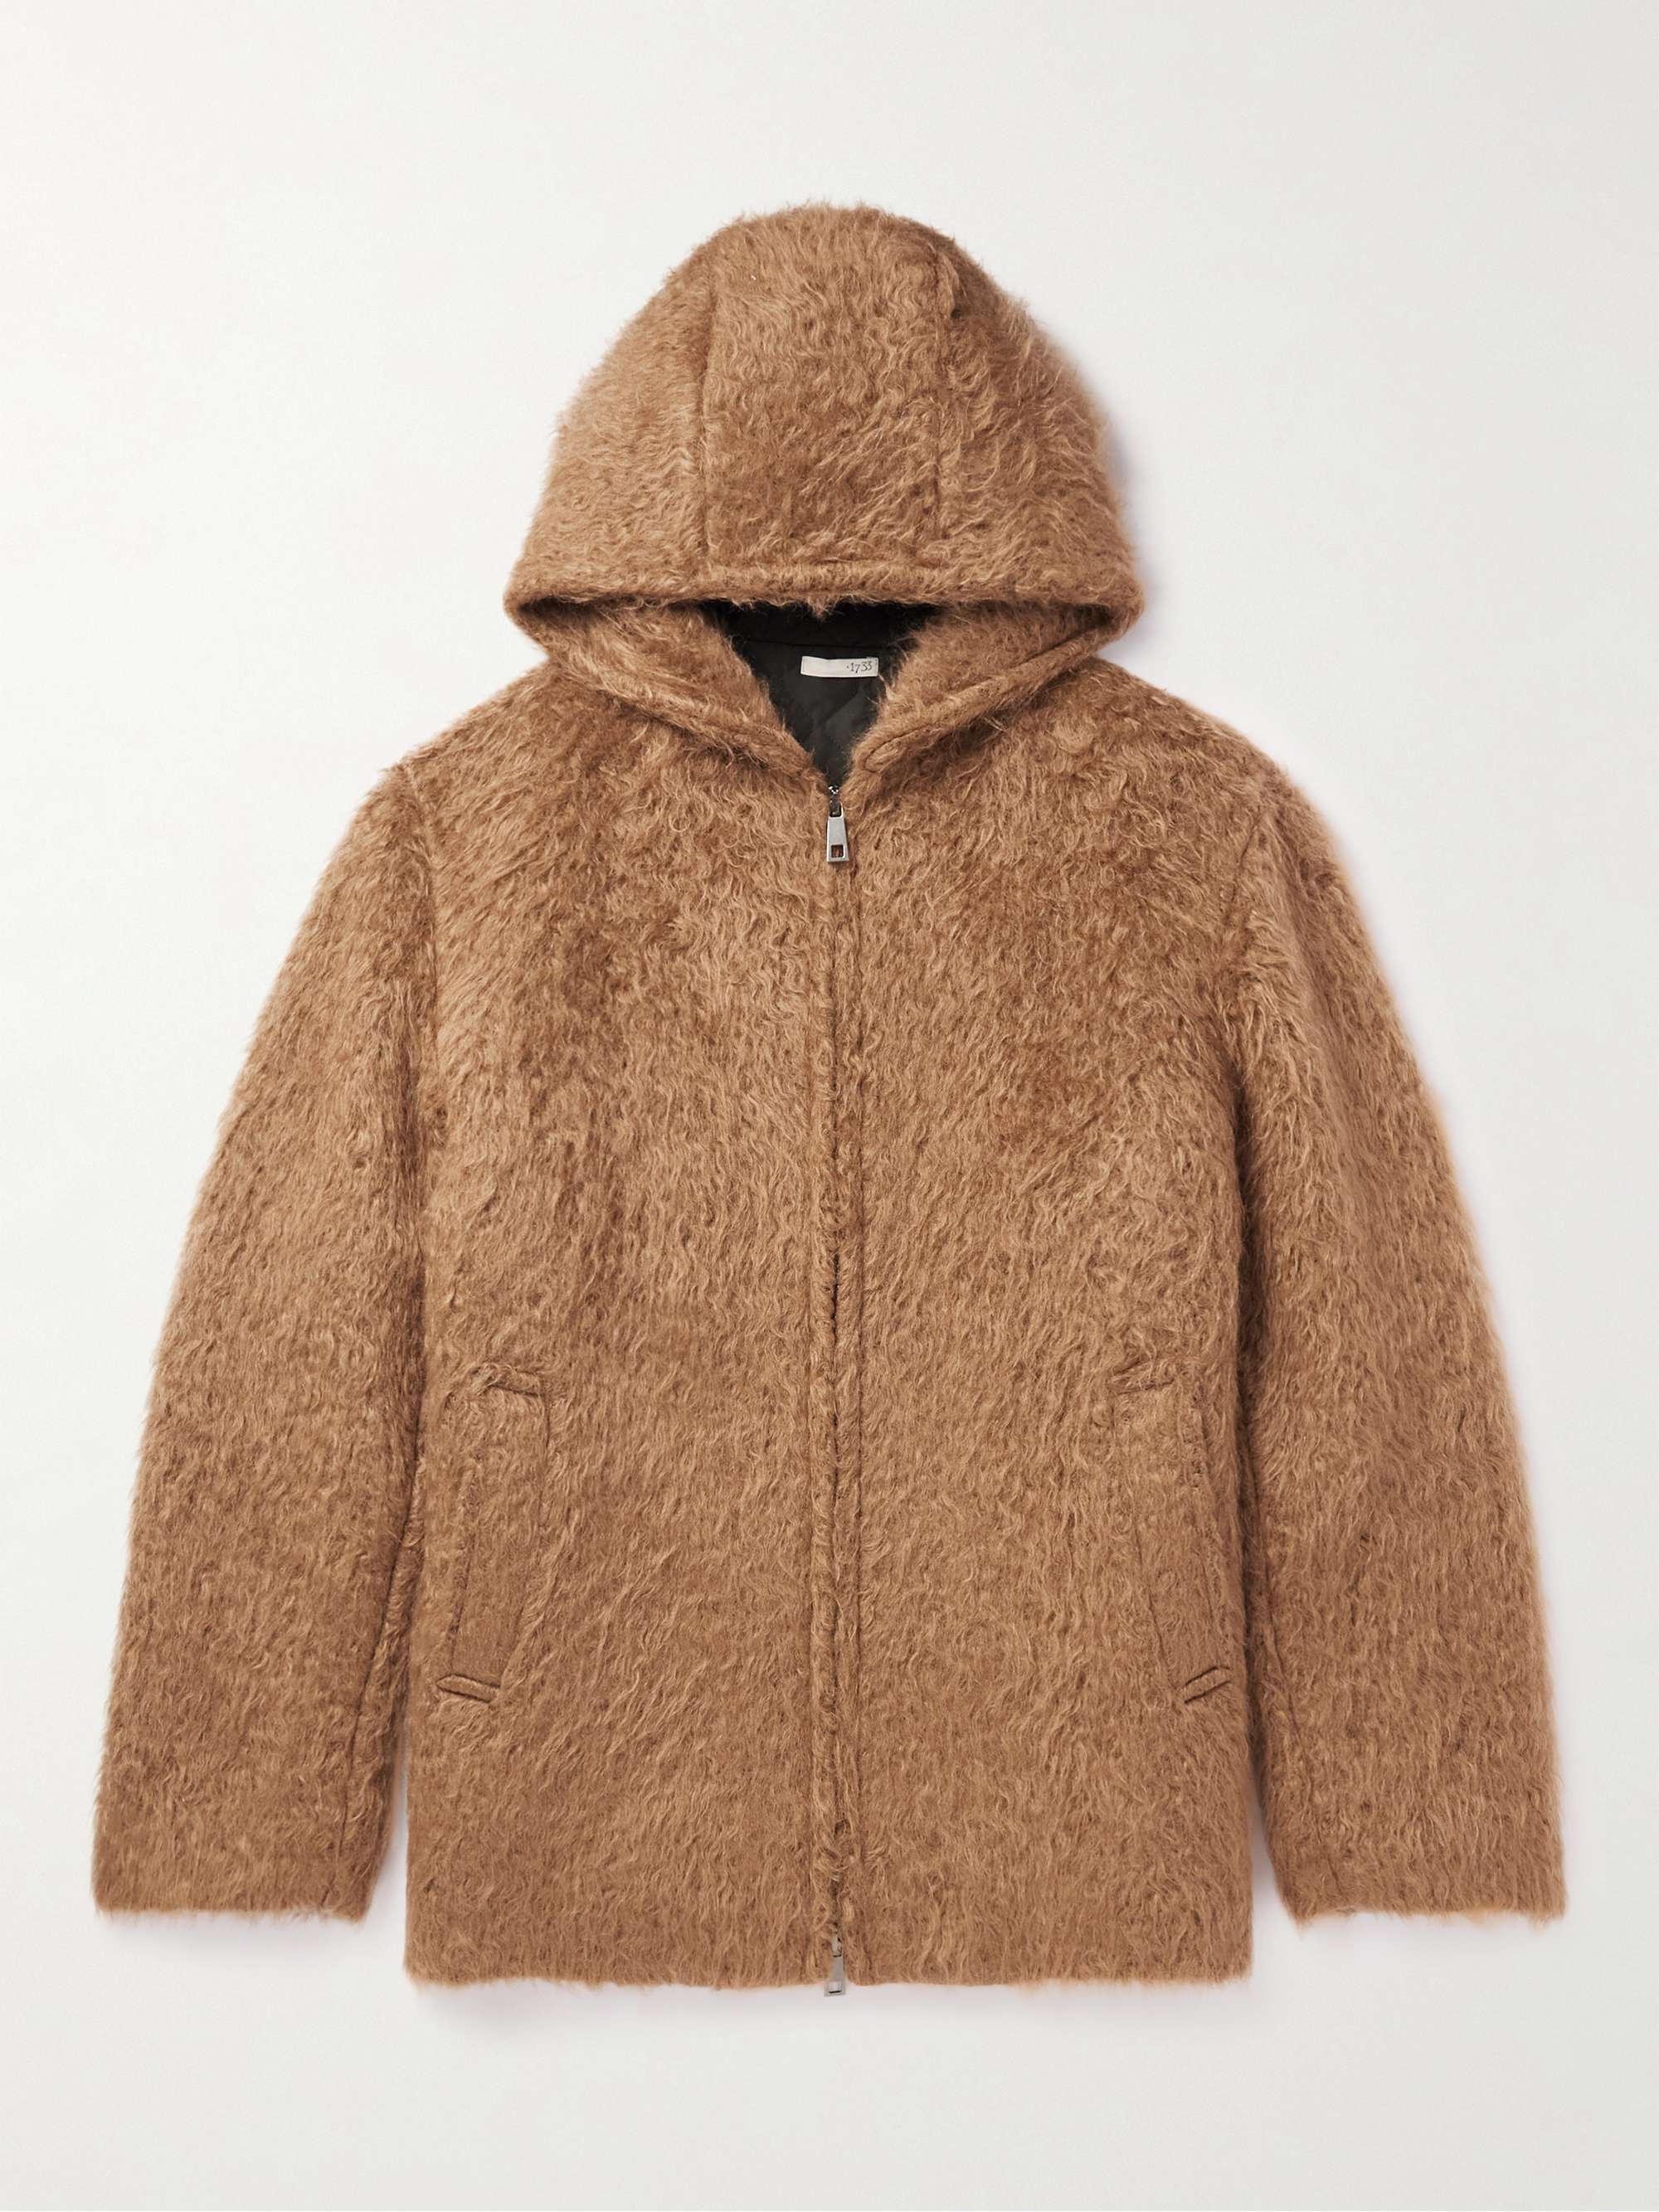 PIACENZA CASHMERE Faux Fur Hooded Jacket